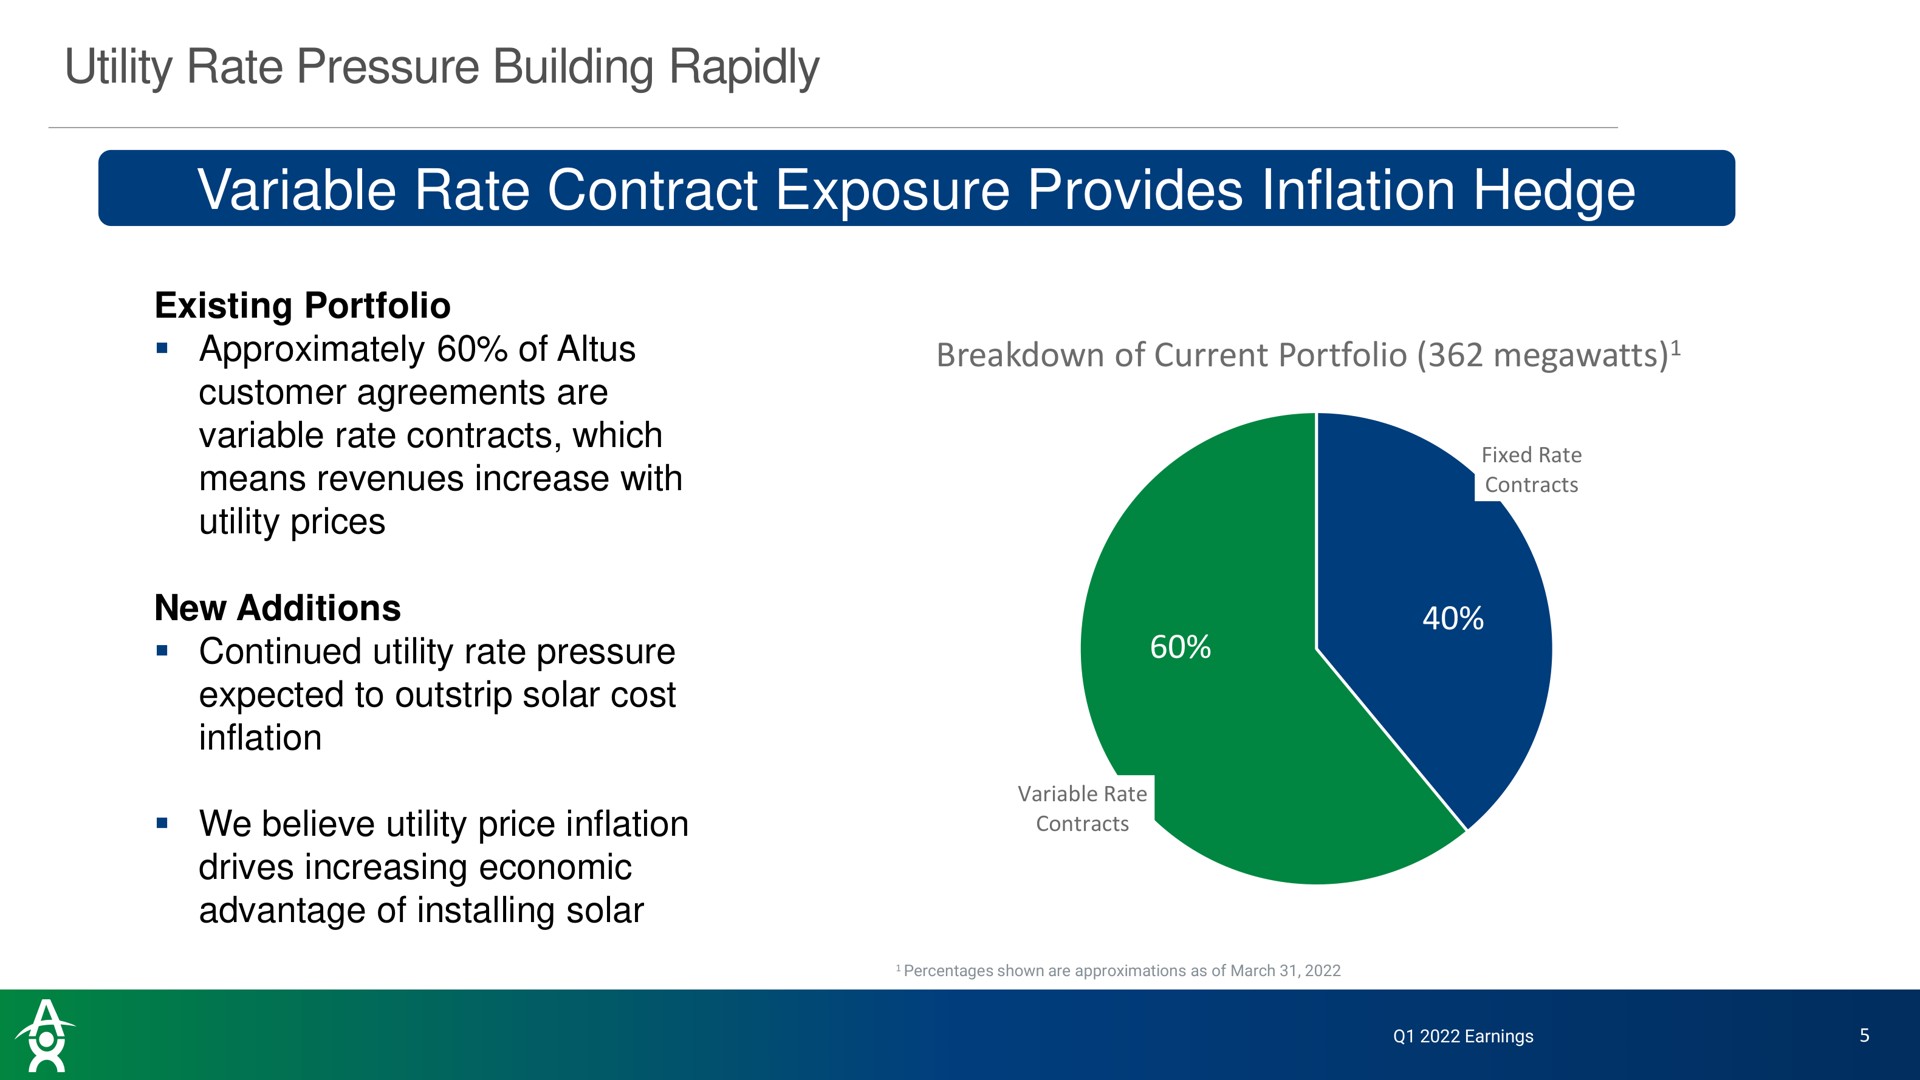 utility rate pressure building rapidly variable rate contract exposure provides inflation hedge existing portfolio approximately of customer agreements are variable rate contracts which means revenues increase with utility prices new additions continued utility rate pressure expected to outstrip solar cost inflation we believe utility price inflation drives increasing economic advantage of solar breakdown of current portfolio megawatts | Altus Power